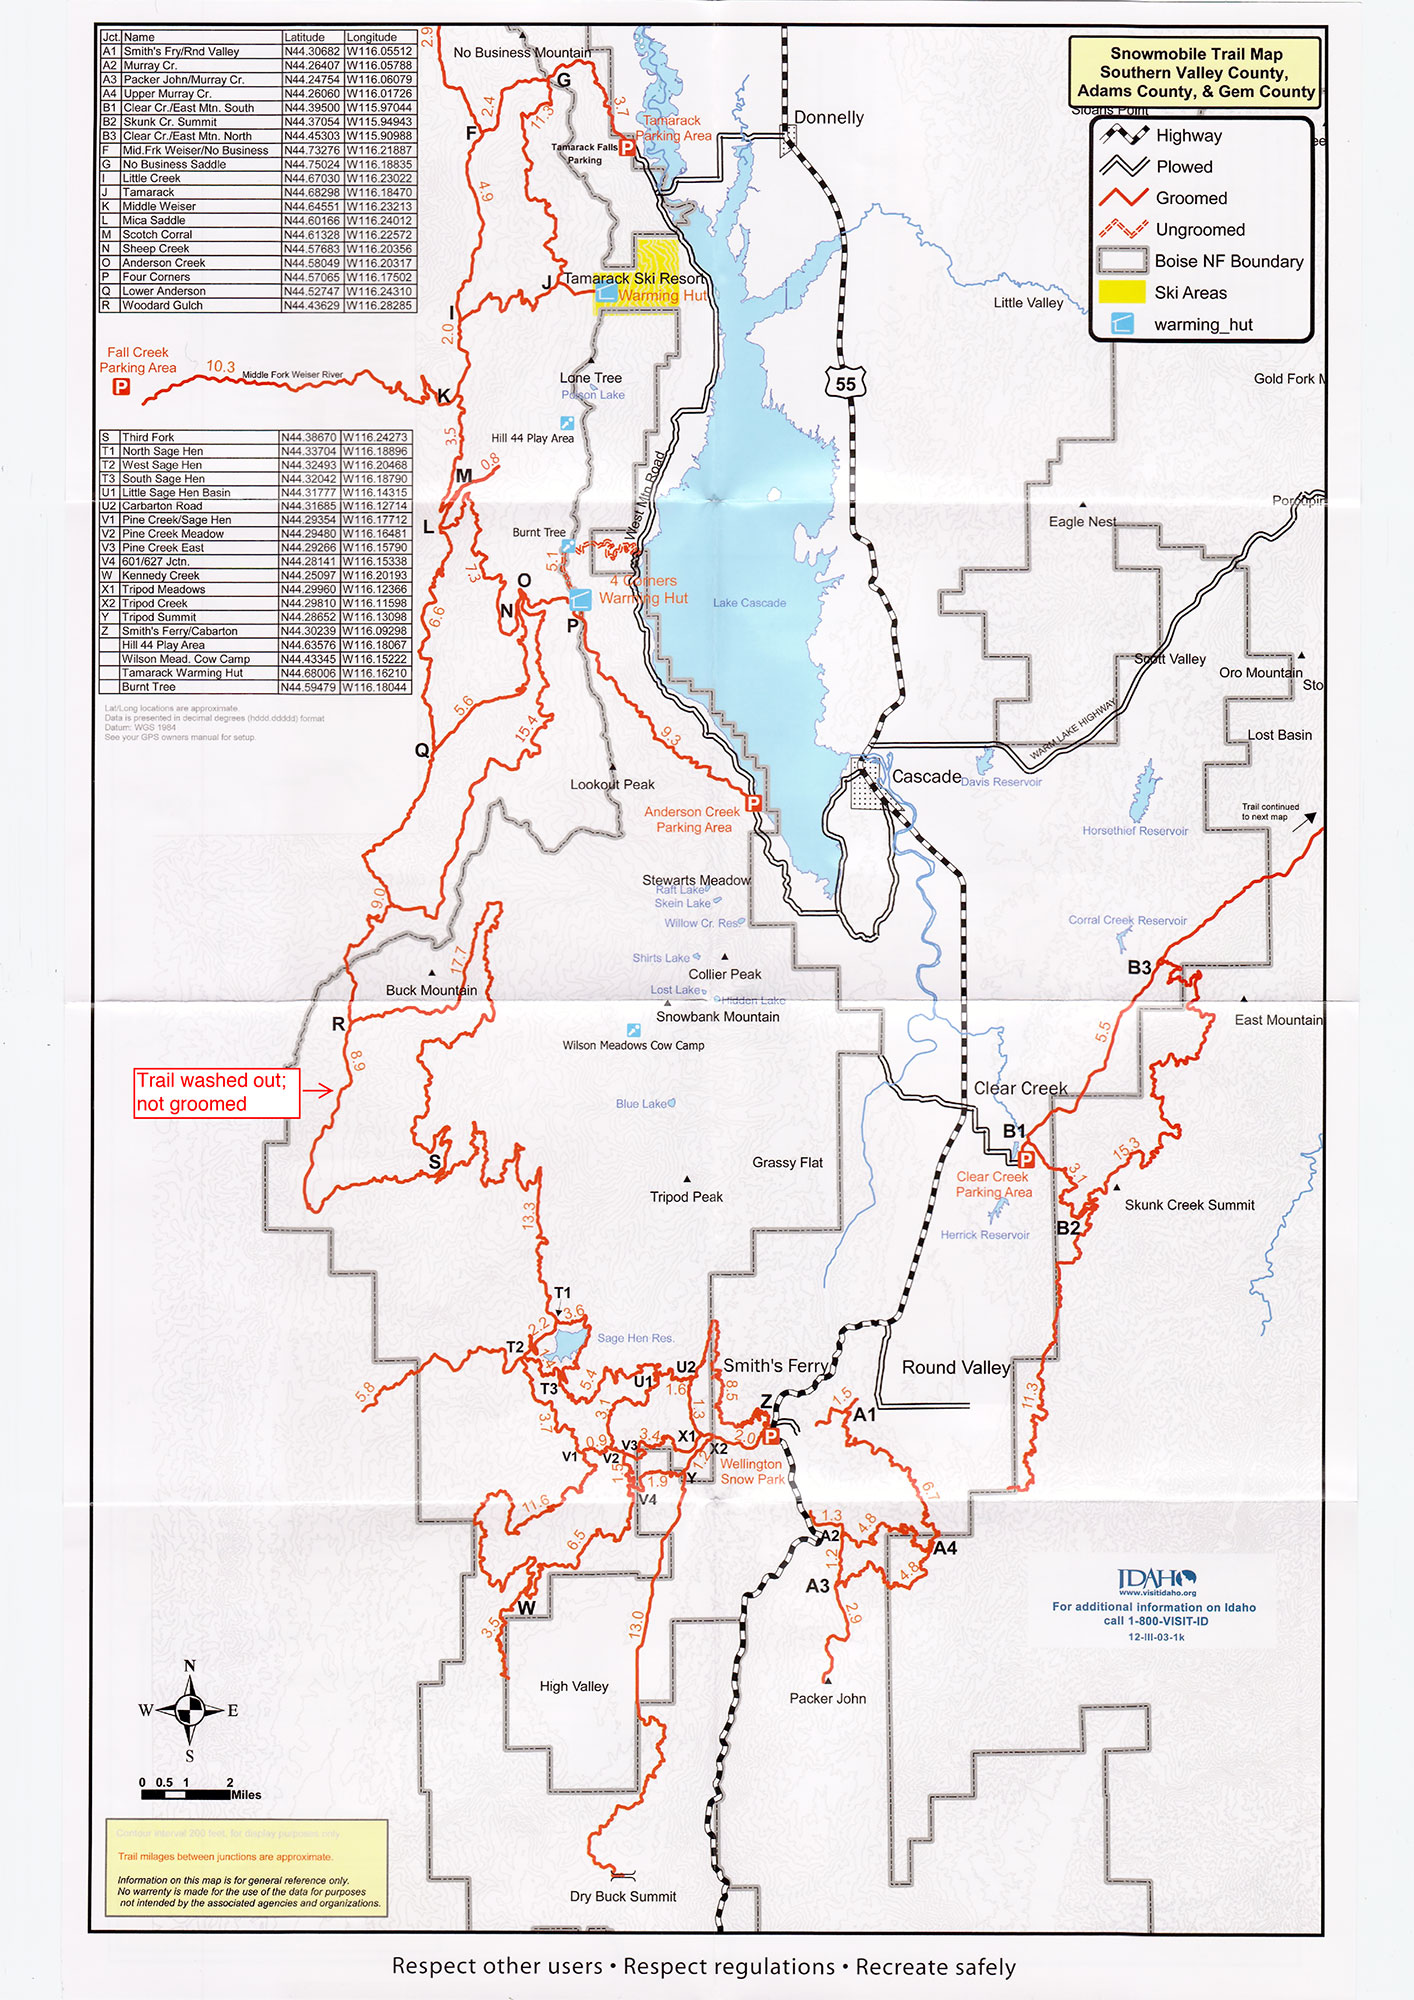 Snowmobile Trail Maps Mccall Donnelly Cascade Smiths Ferry